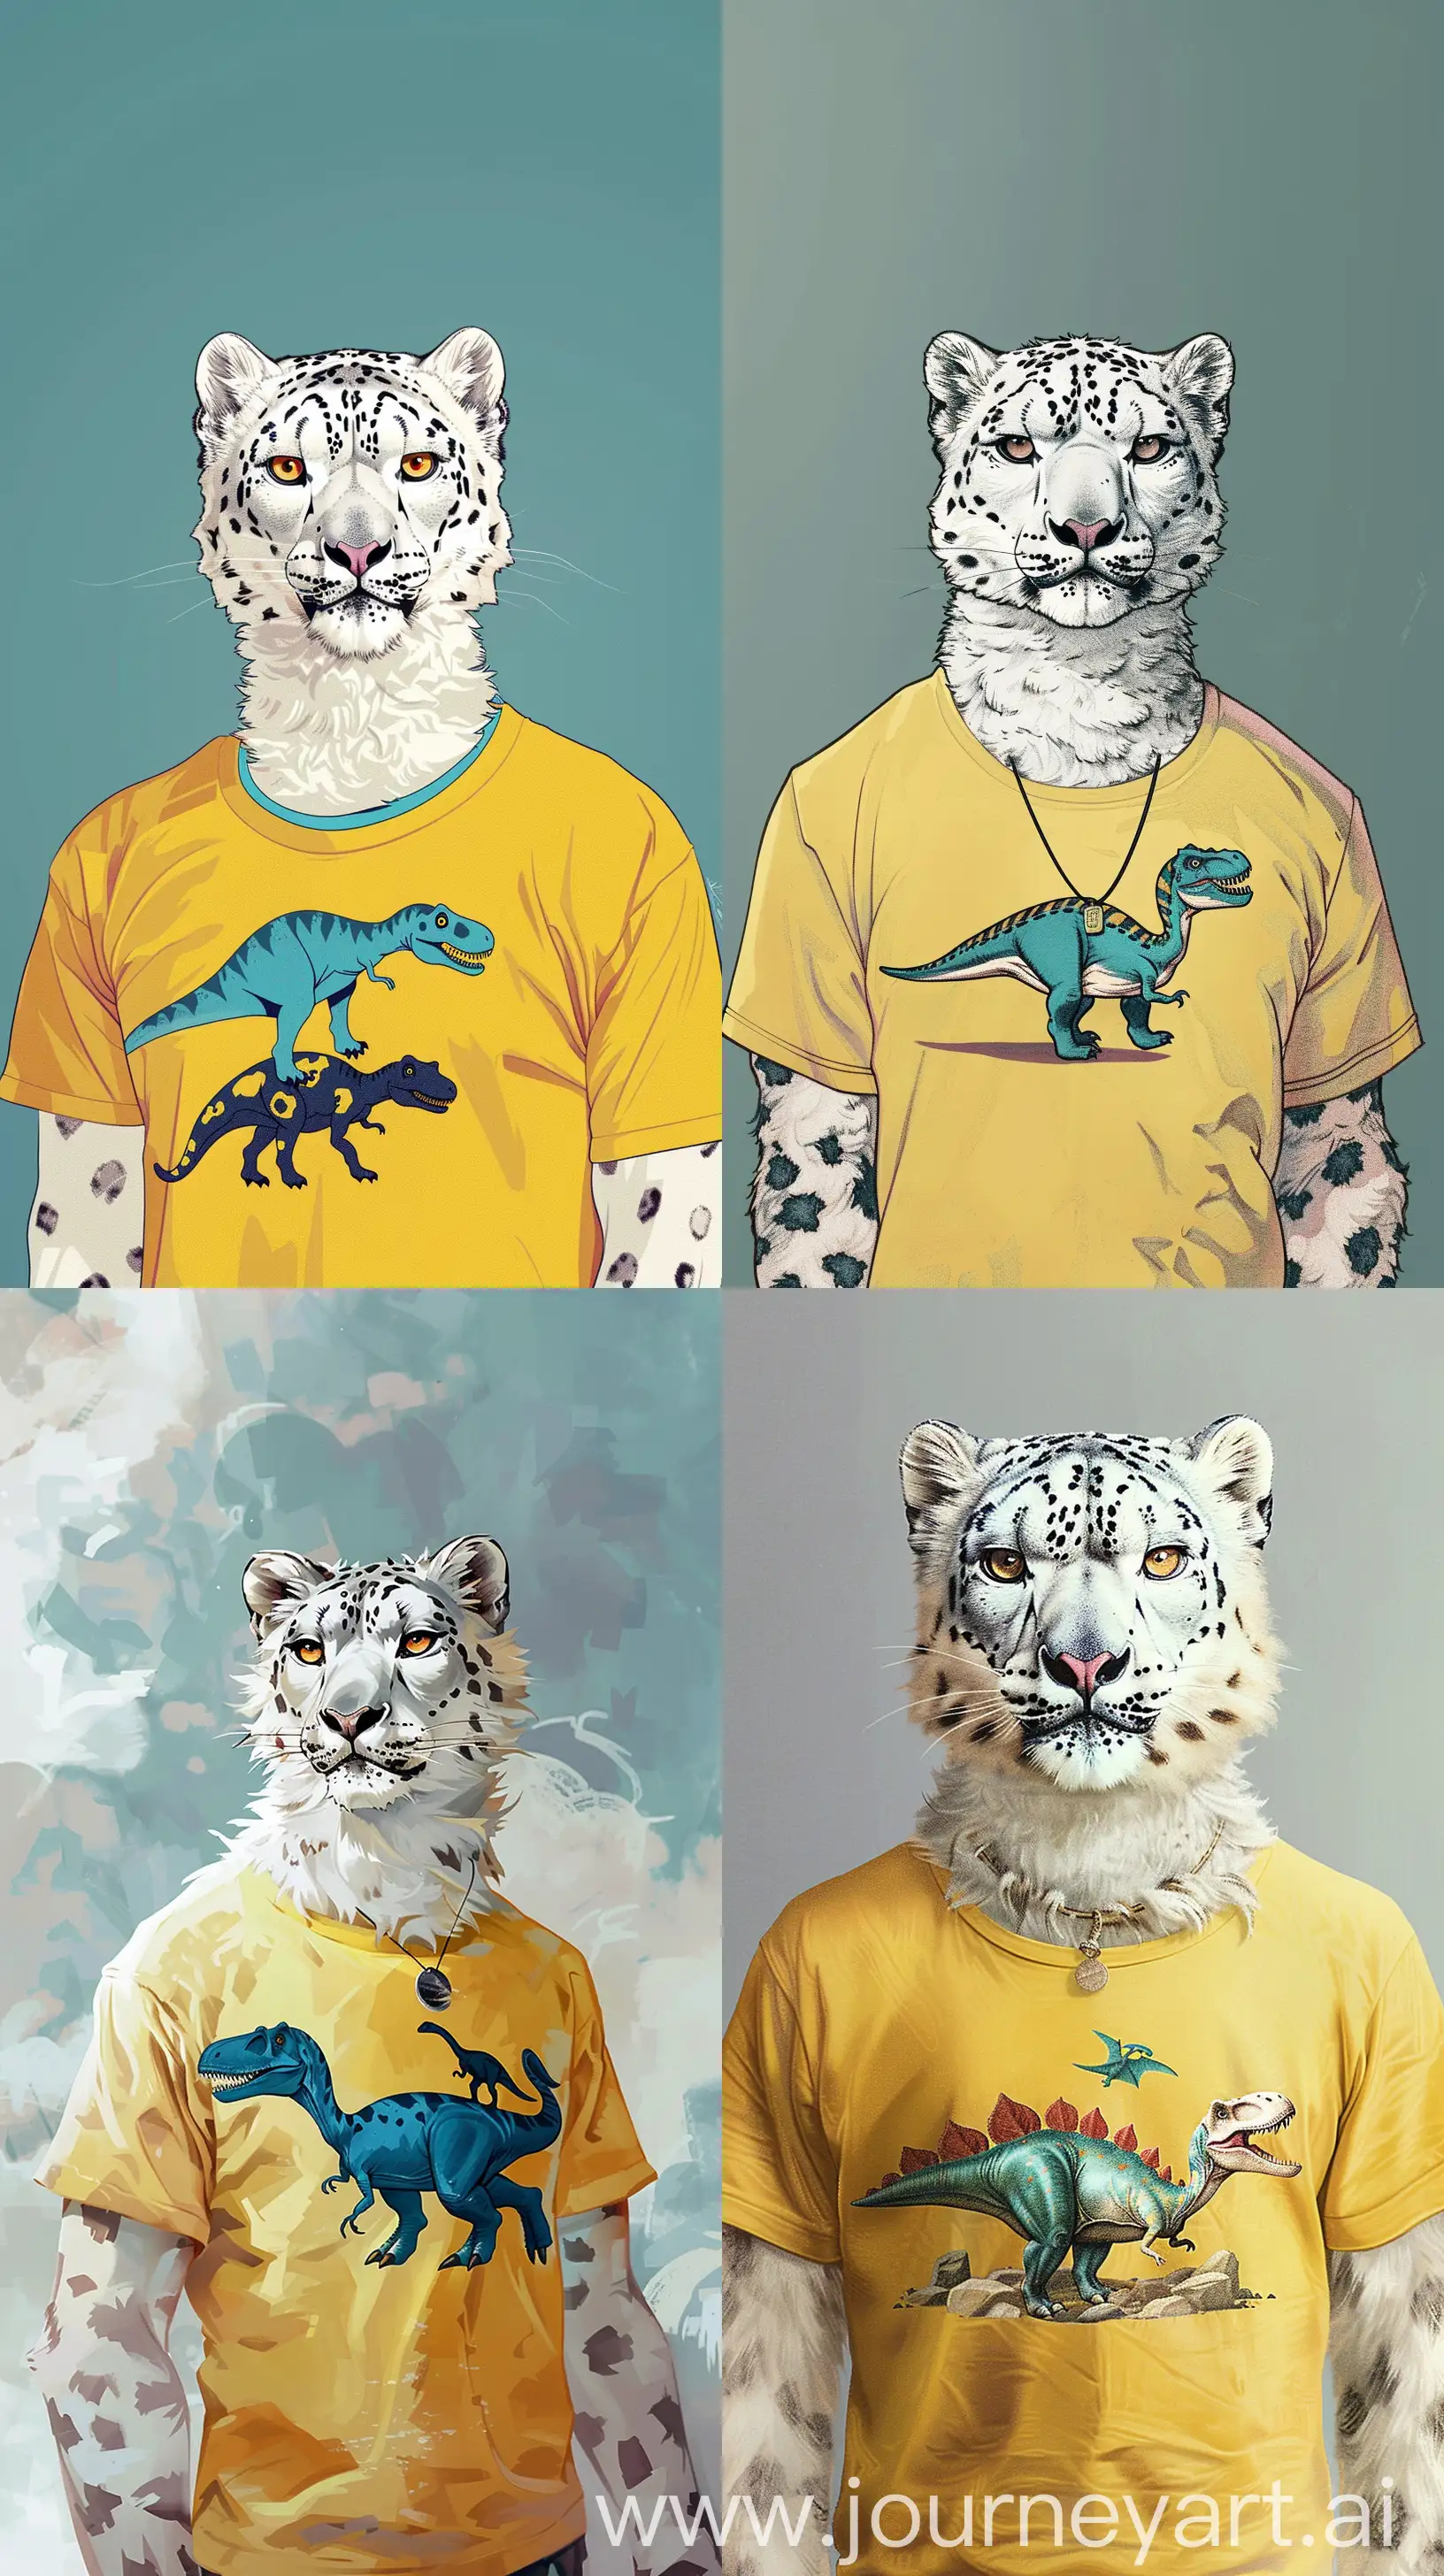 Kees van dongen art style of a snow leopard as a man , white body , wearing a yellow t shirt with a dinosaur on it, as phone wallpaper,  --ar 9:16